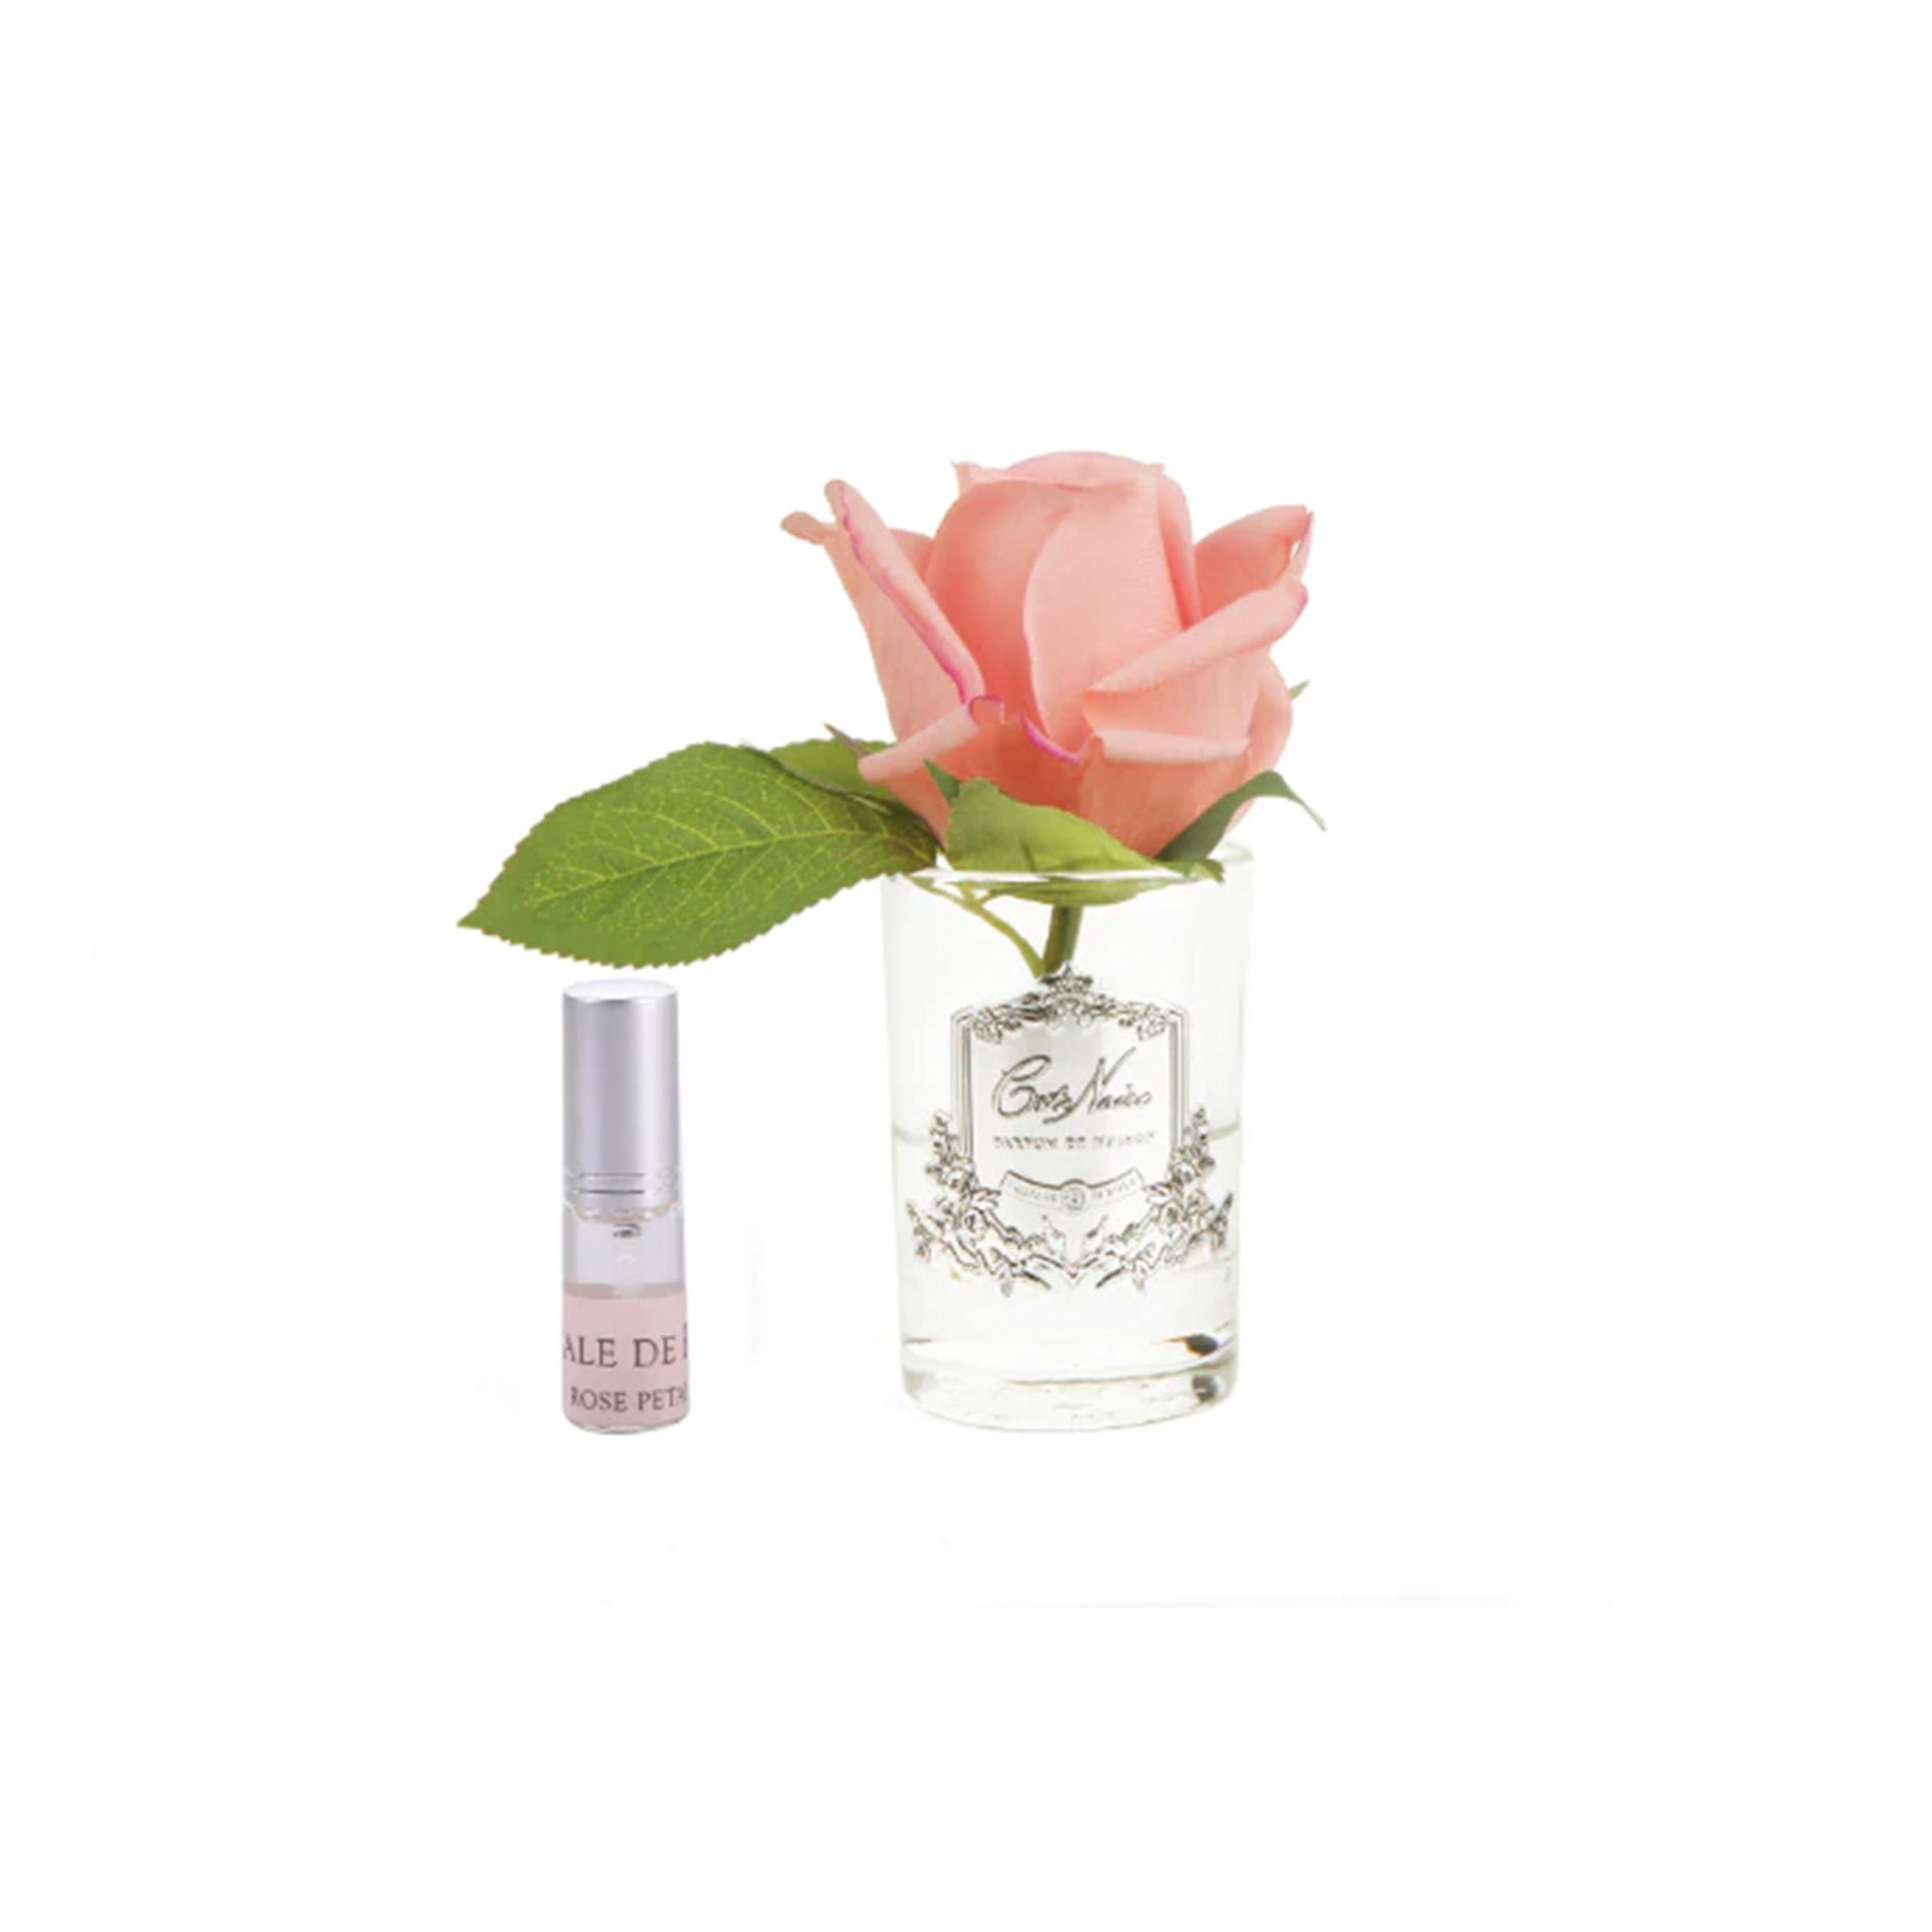 a pink rose in a glass vase next to a bottle of fragrance